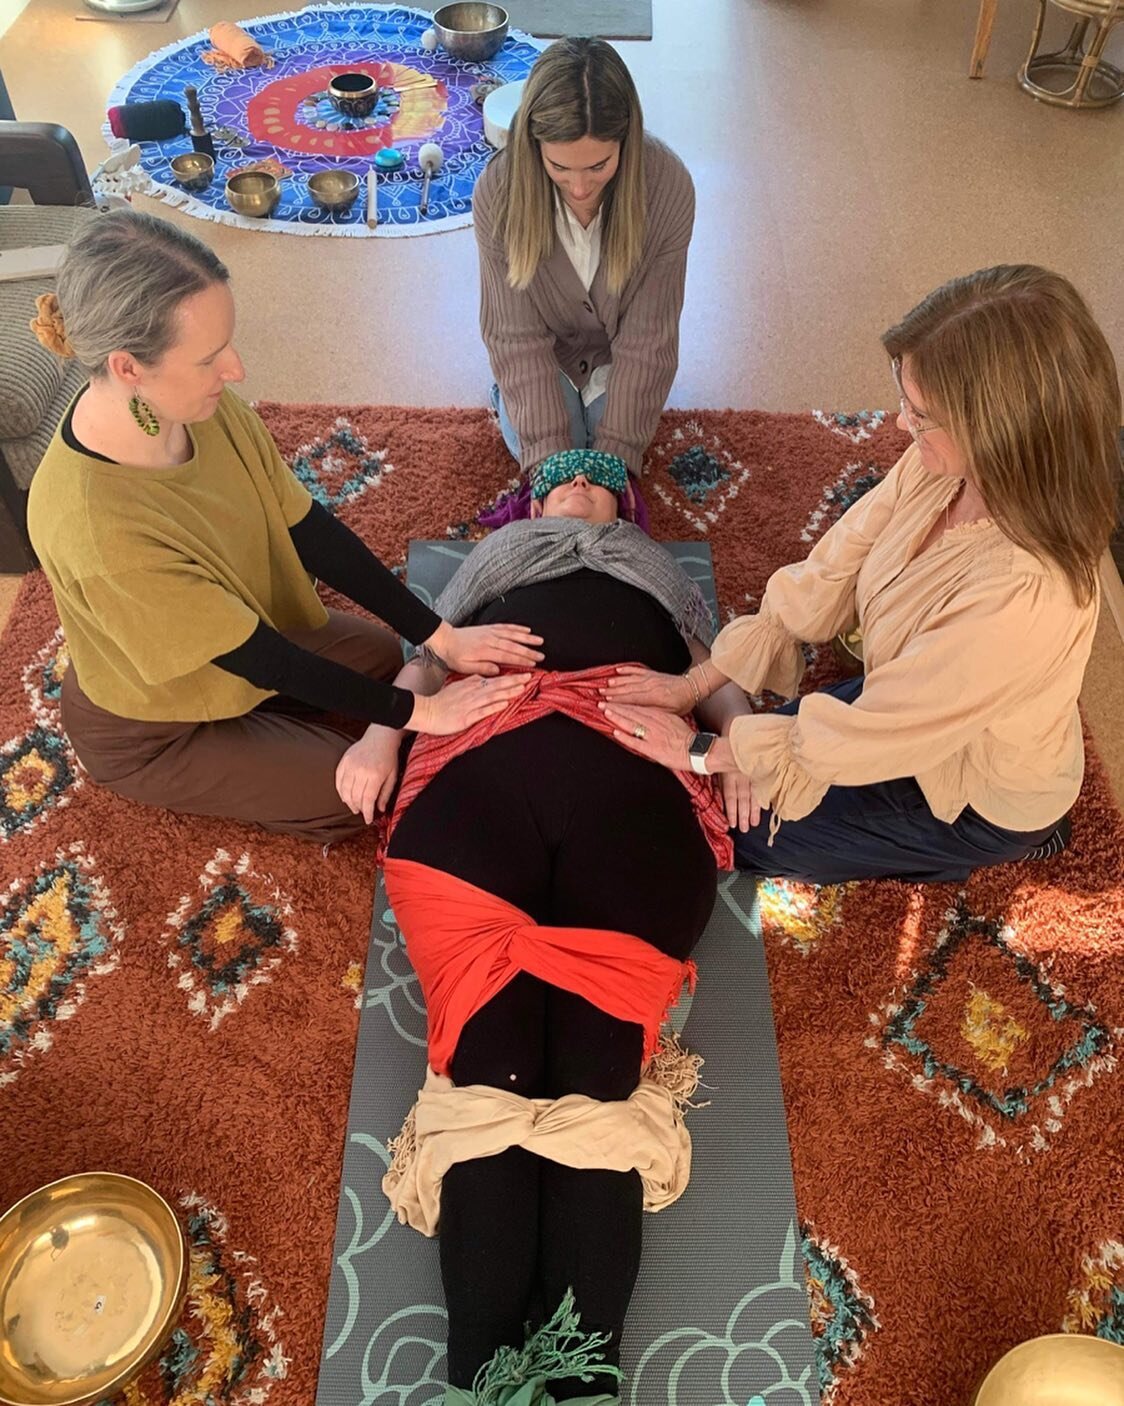 This week I had the privilege of attending a Closing of the Bones workshop, facilitated by the lovely @melcravenyoga. It was wonderful to learn about this innate, cross-cultural postpartum practice alongside some of the other beautiful doulas based i